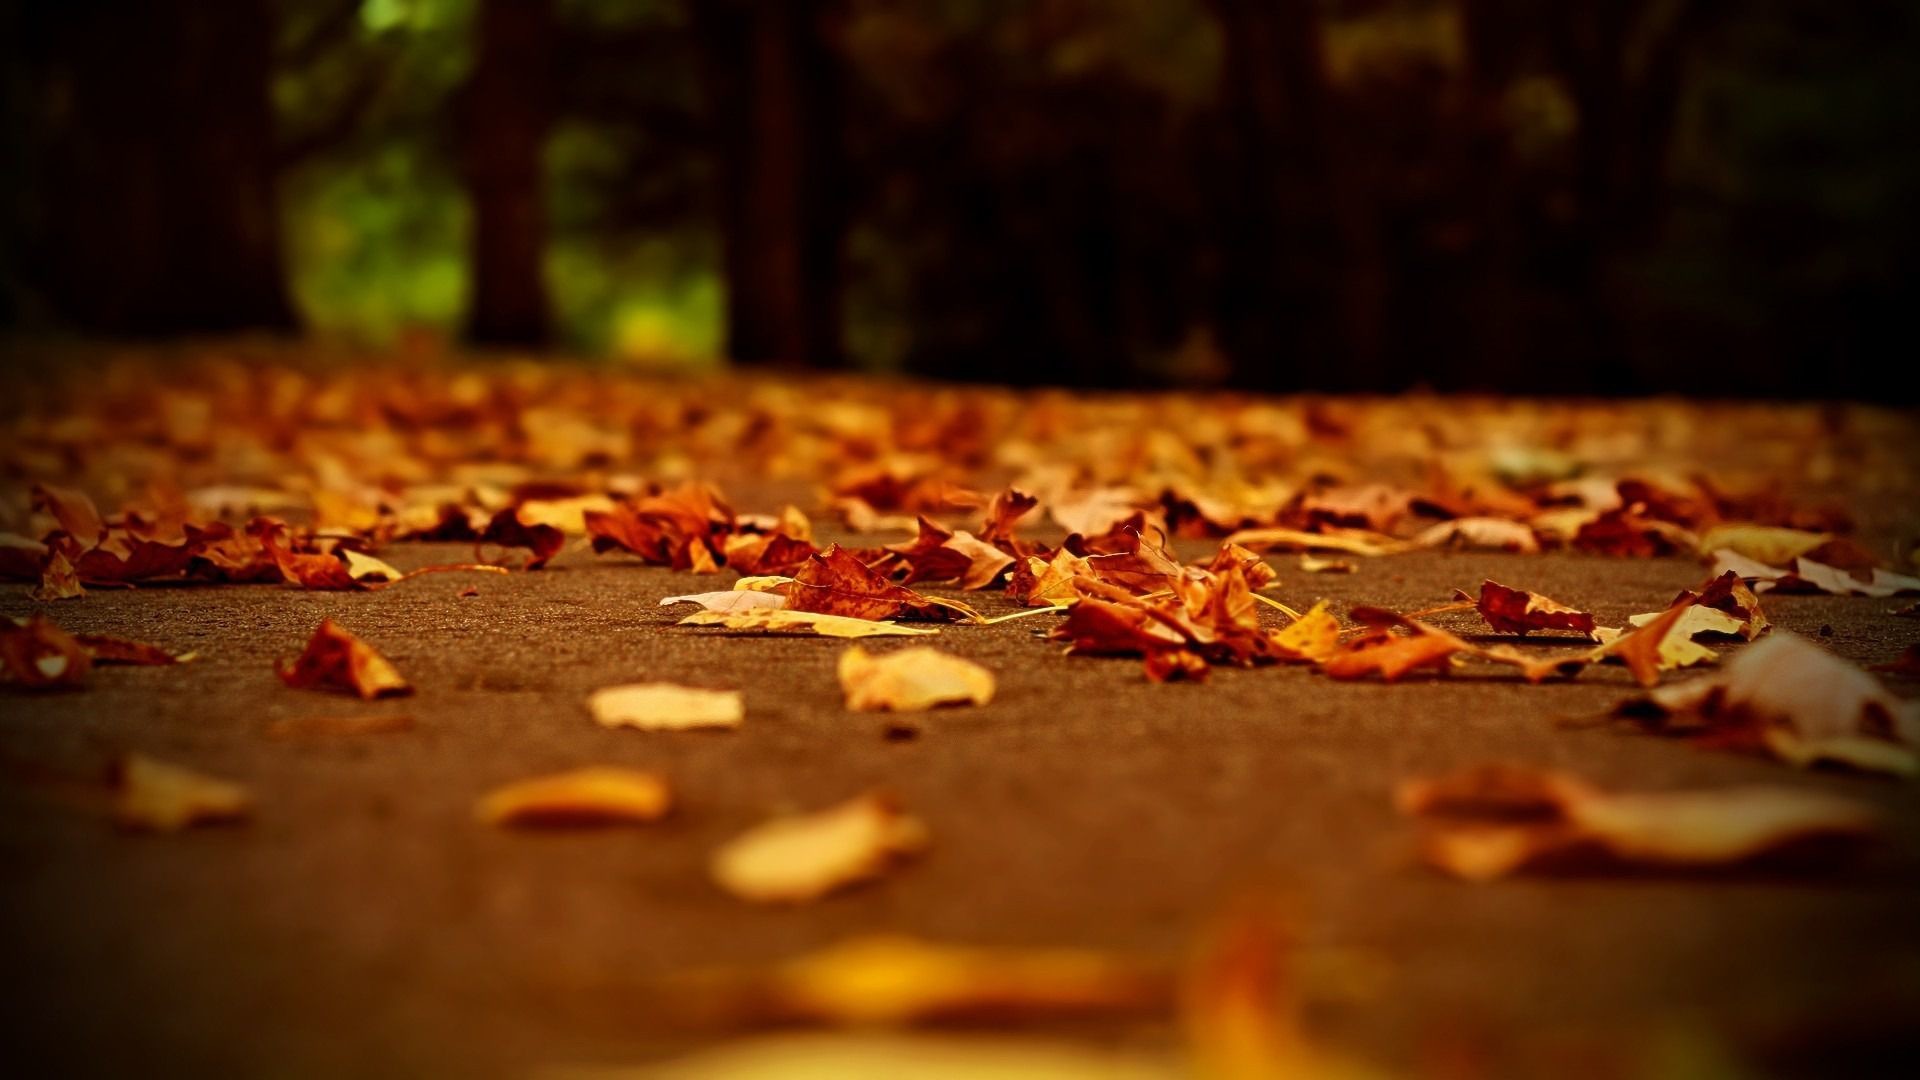 1920x1080 The ground covered with fallen Autumn leaves